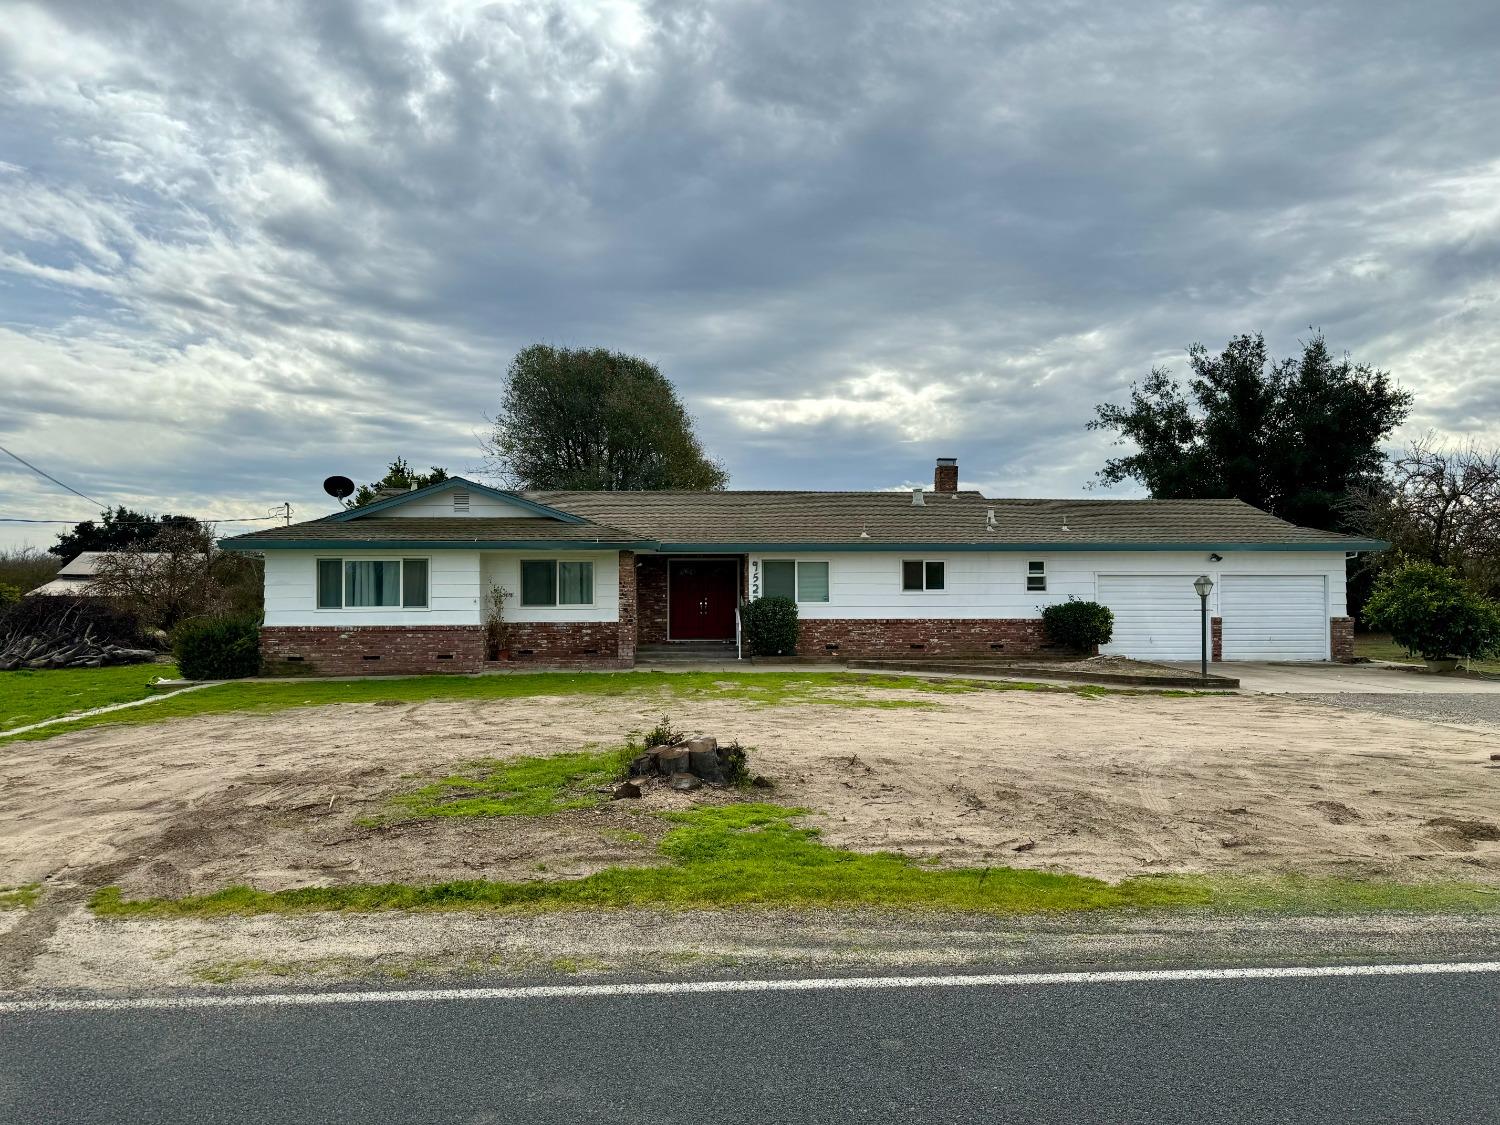 Photo of 9522 Southland Rd in Manteca, CA